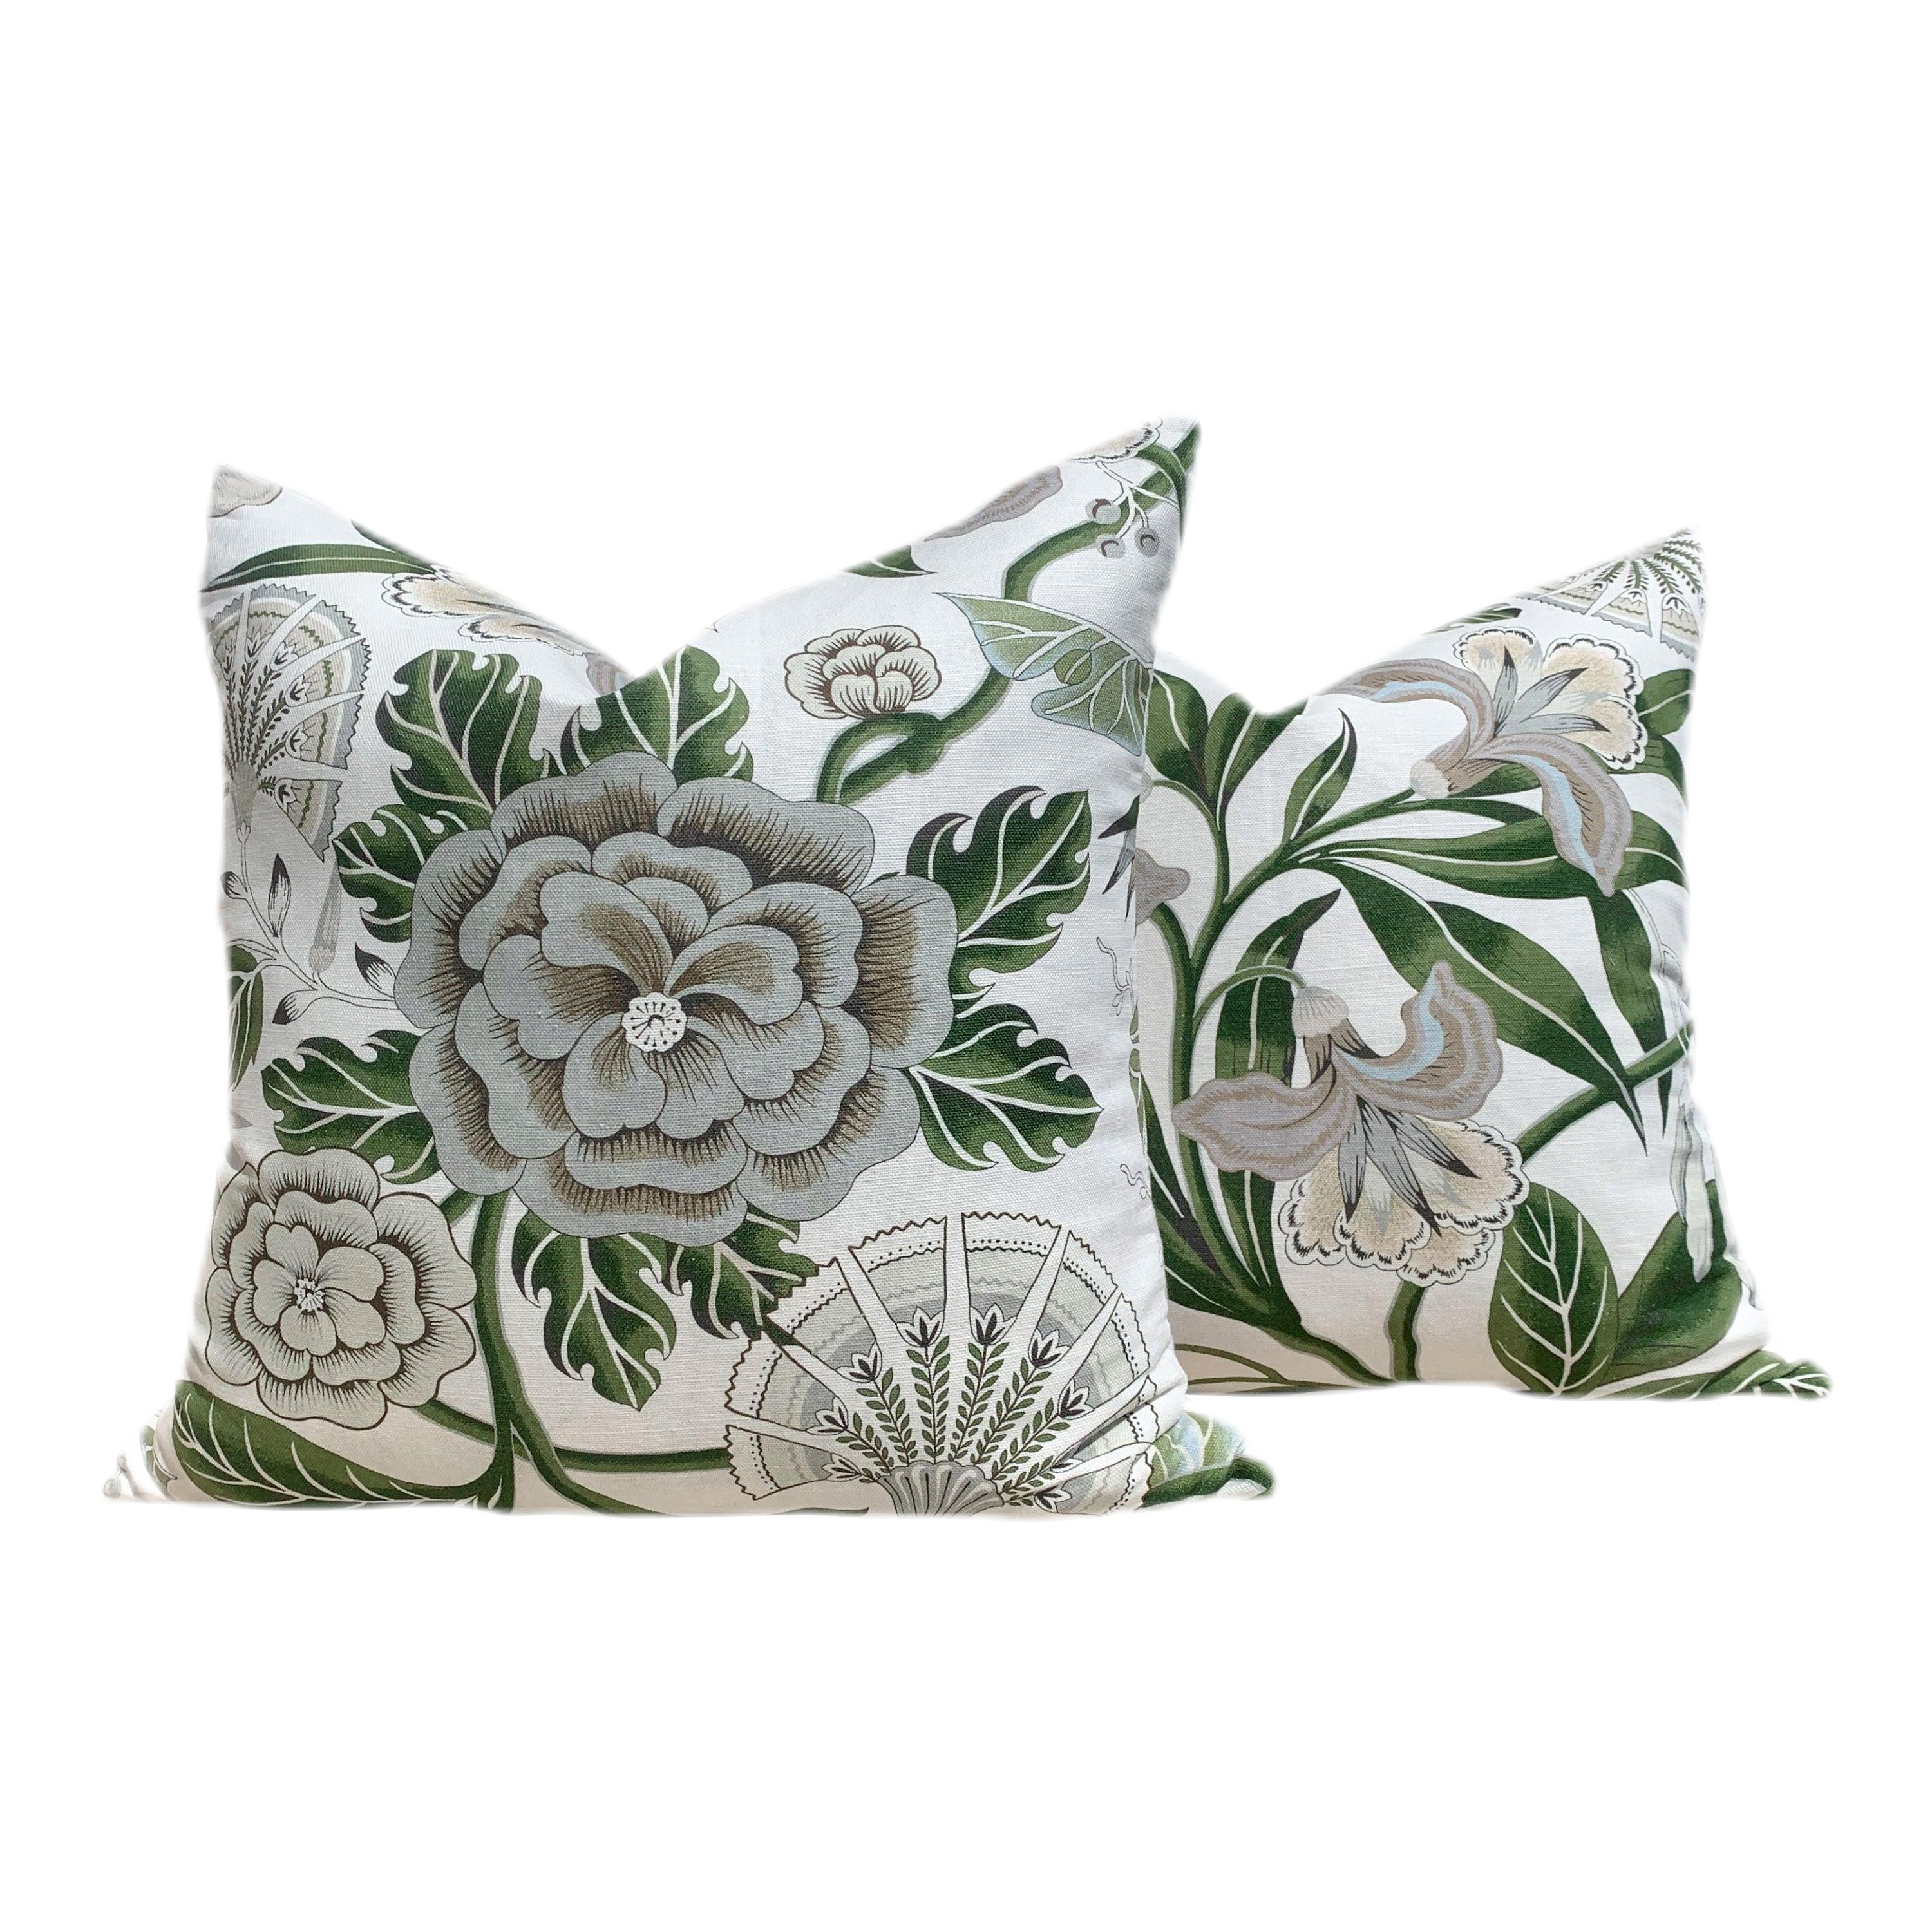 Thibaut Cleo Floral Pillow in Green, White,Taupe and Beige.